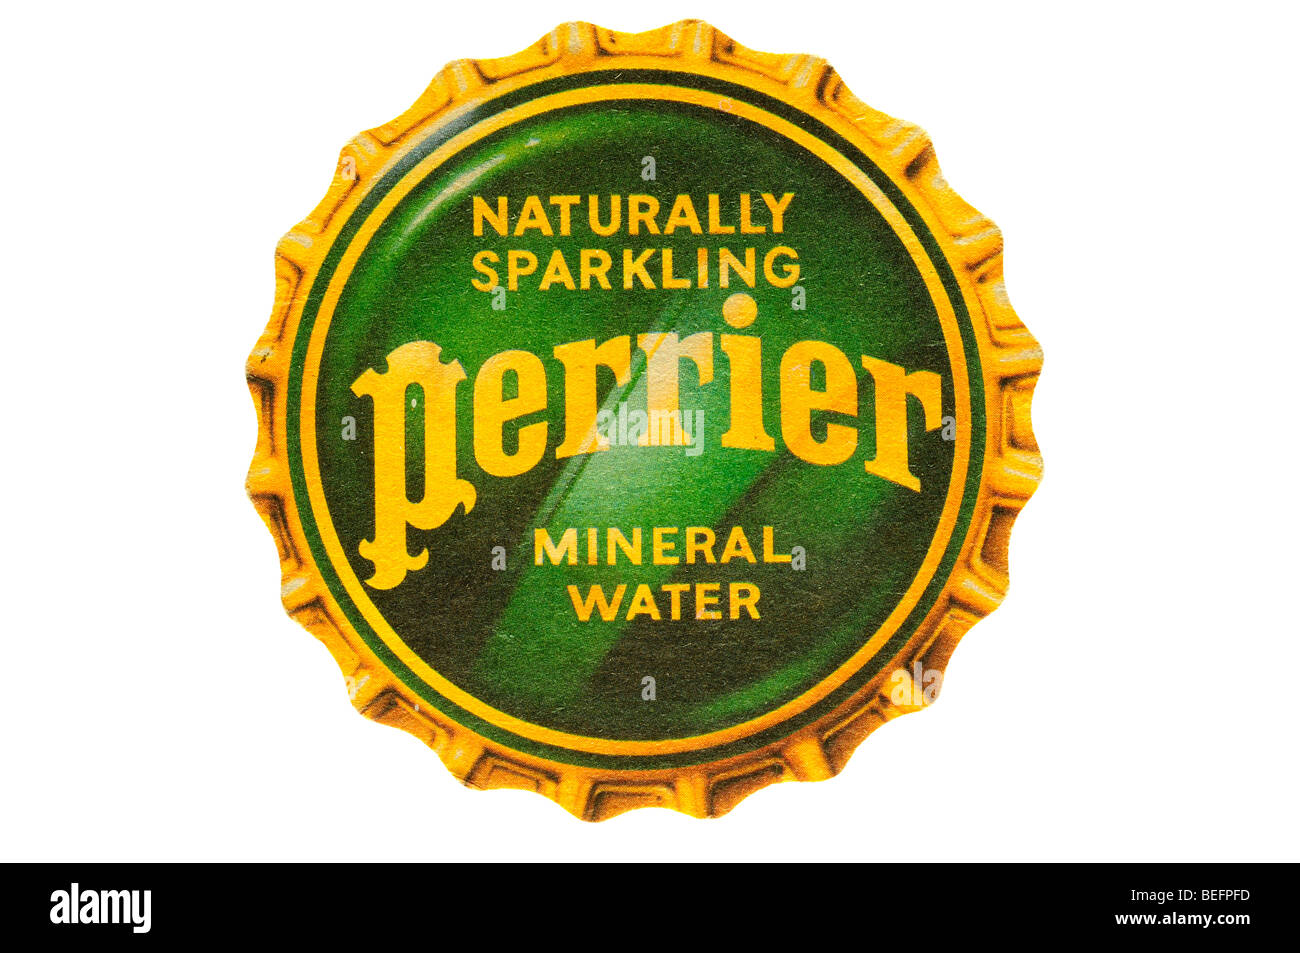 naturally sparkling perrier mineral water Stock Photo